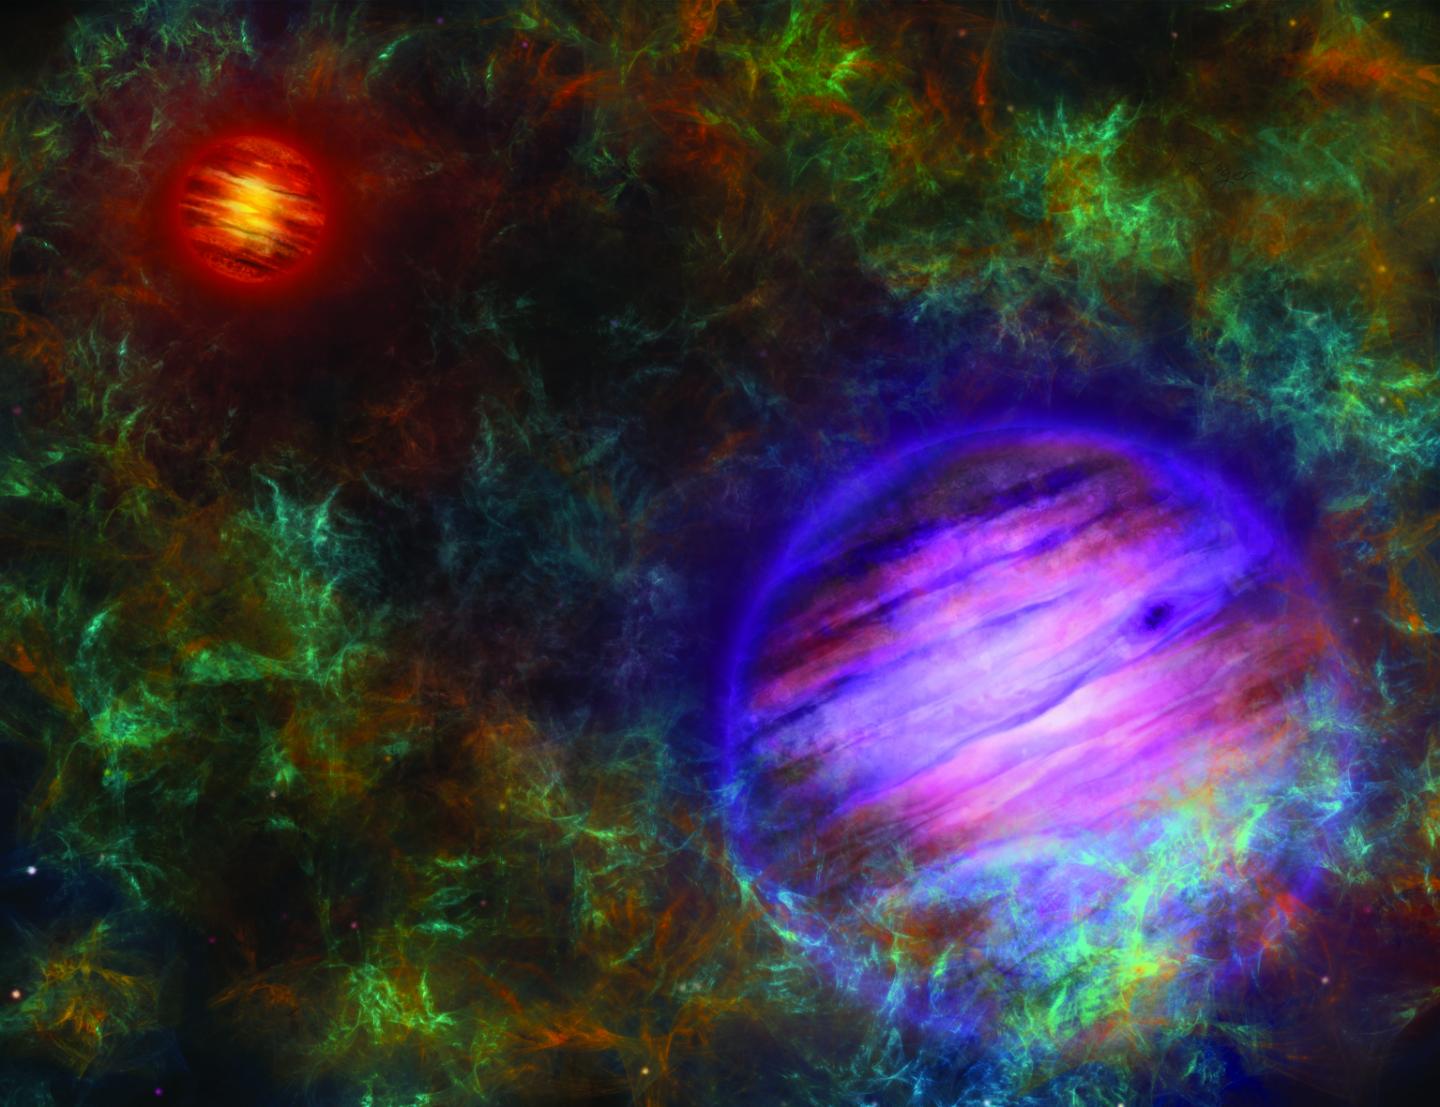 Artist's composition of the two brown dwarfs, in the foreground Oph 98B in purple, in the background Oph 98A in red.